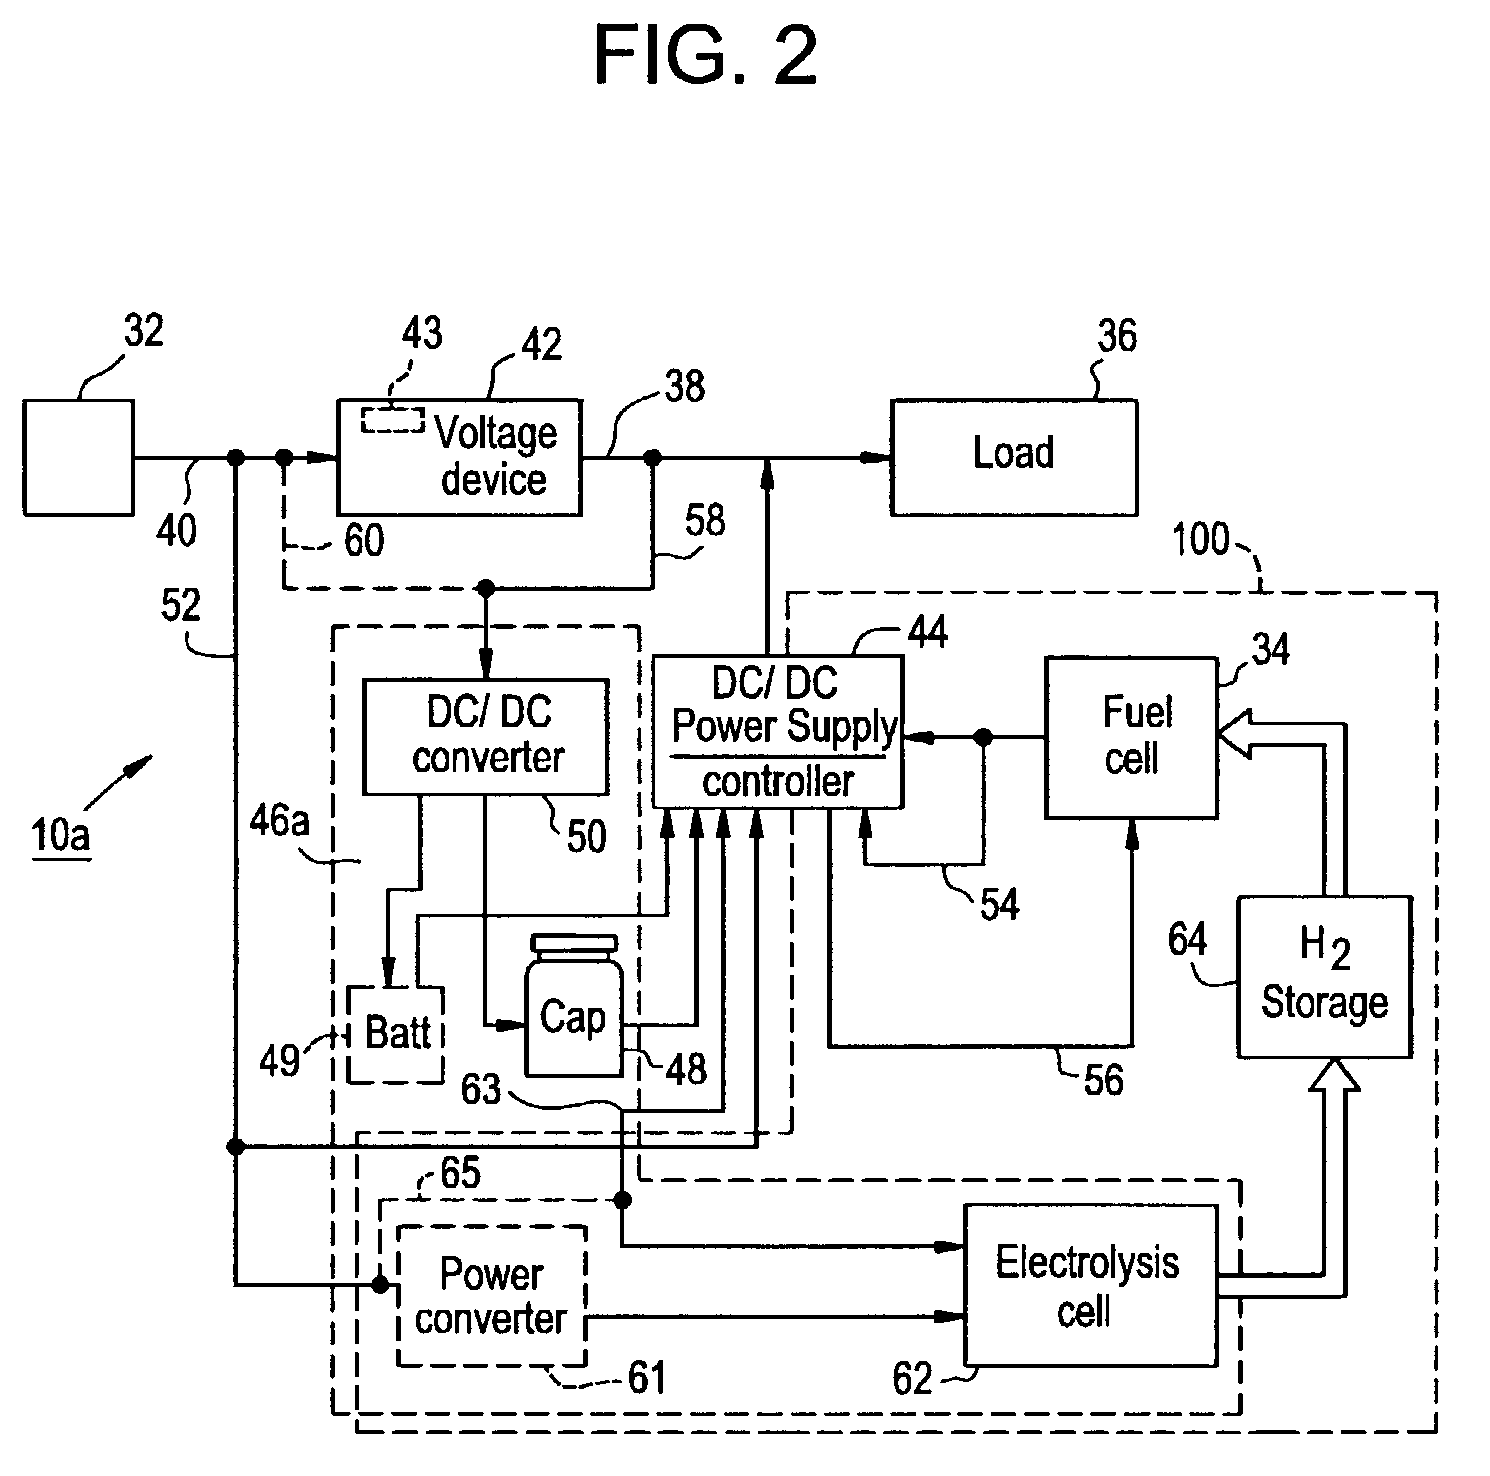 Method and system for controlling and recovering short duration bridge power to maximize backup power